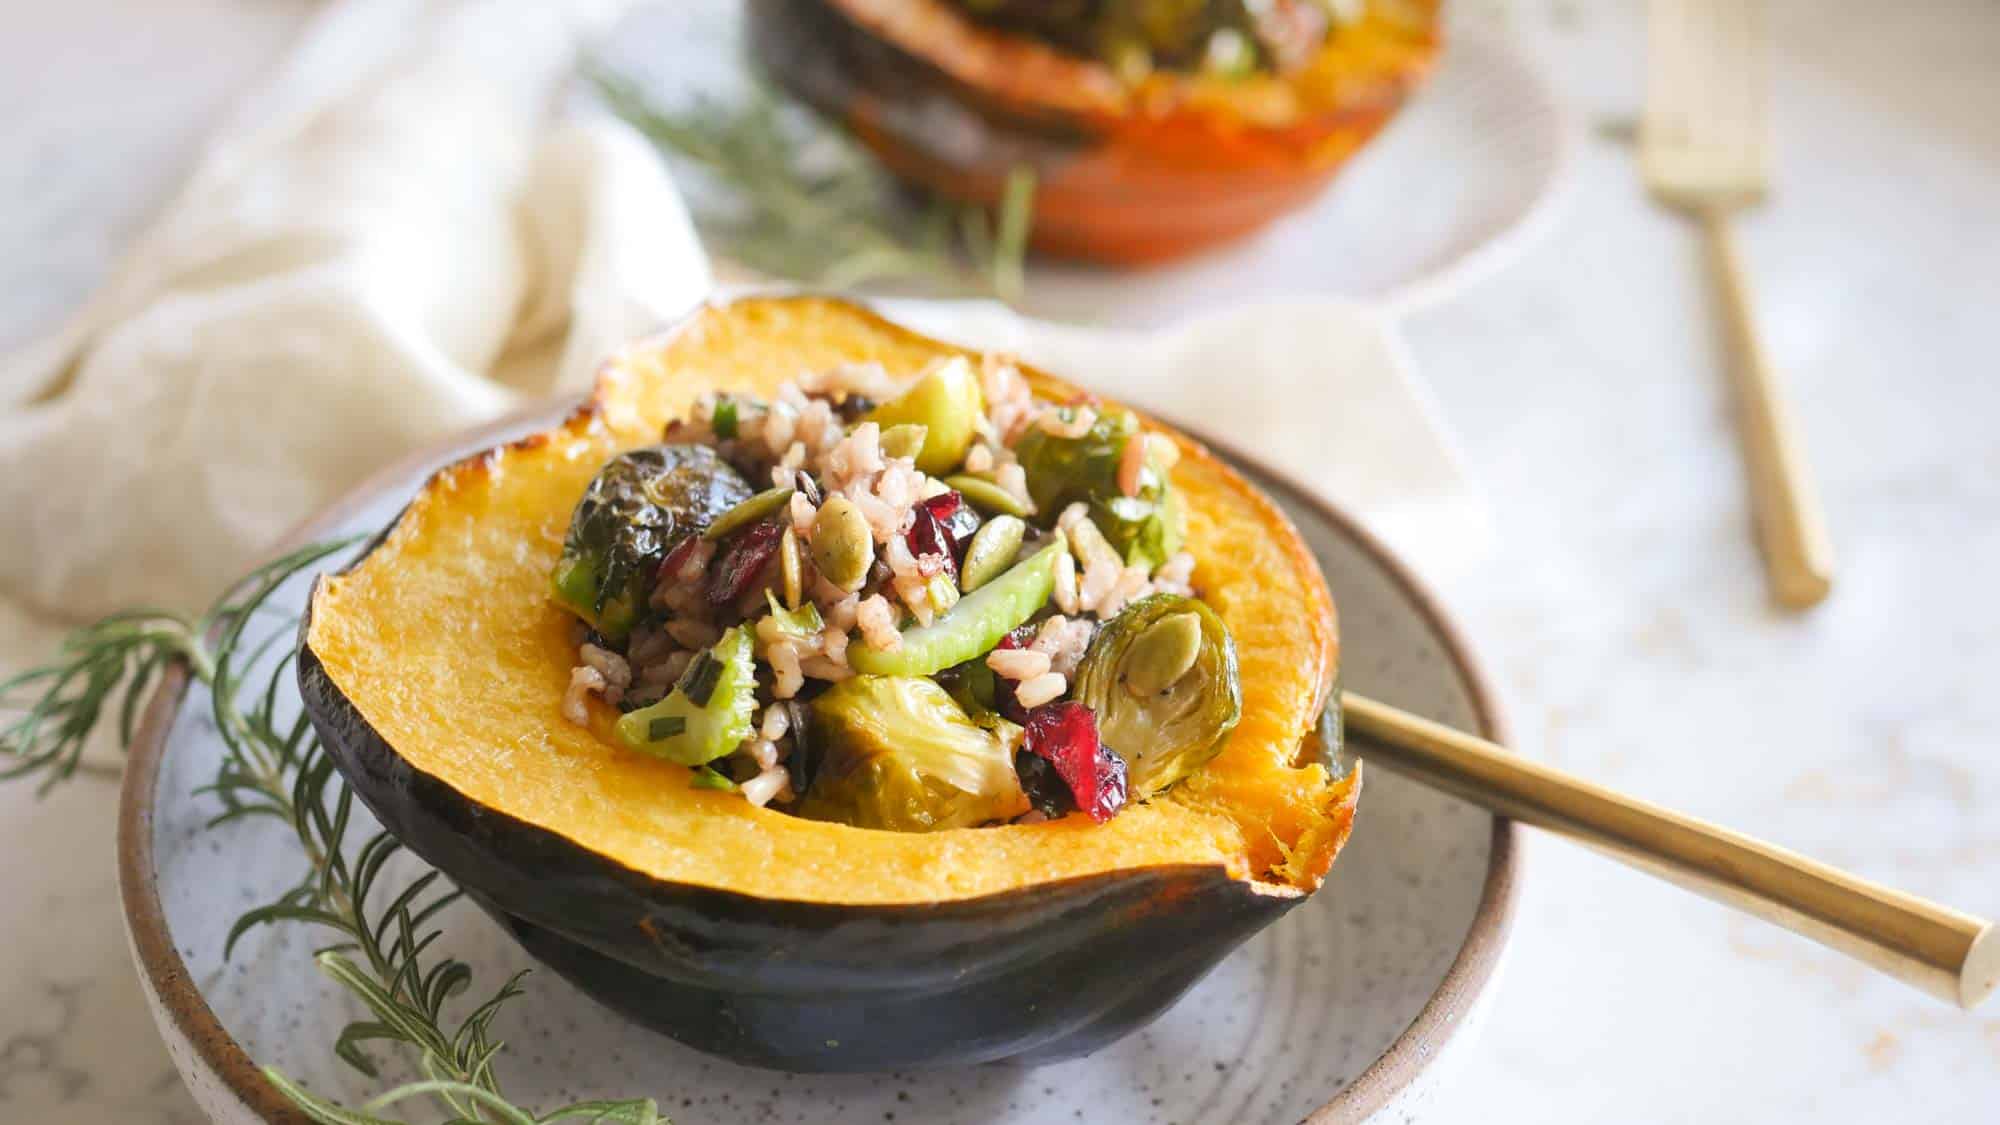 Stuffed Acorn Squash Vegan Thanksgiving Recipe On a Plate With Tahini Dressing and A Sprig of Rosemary